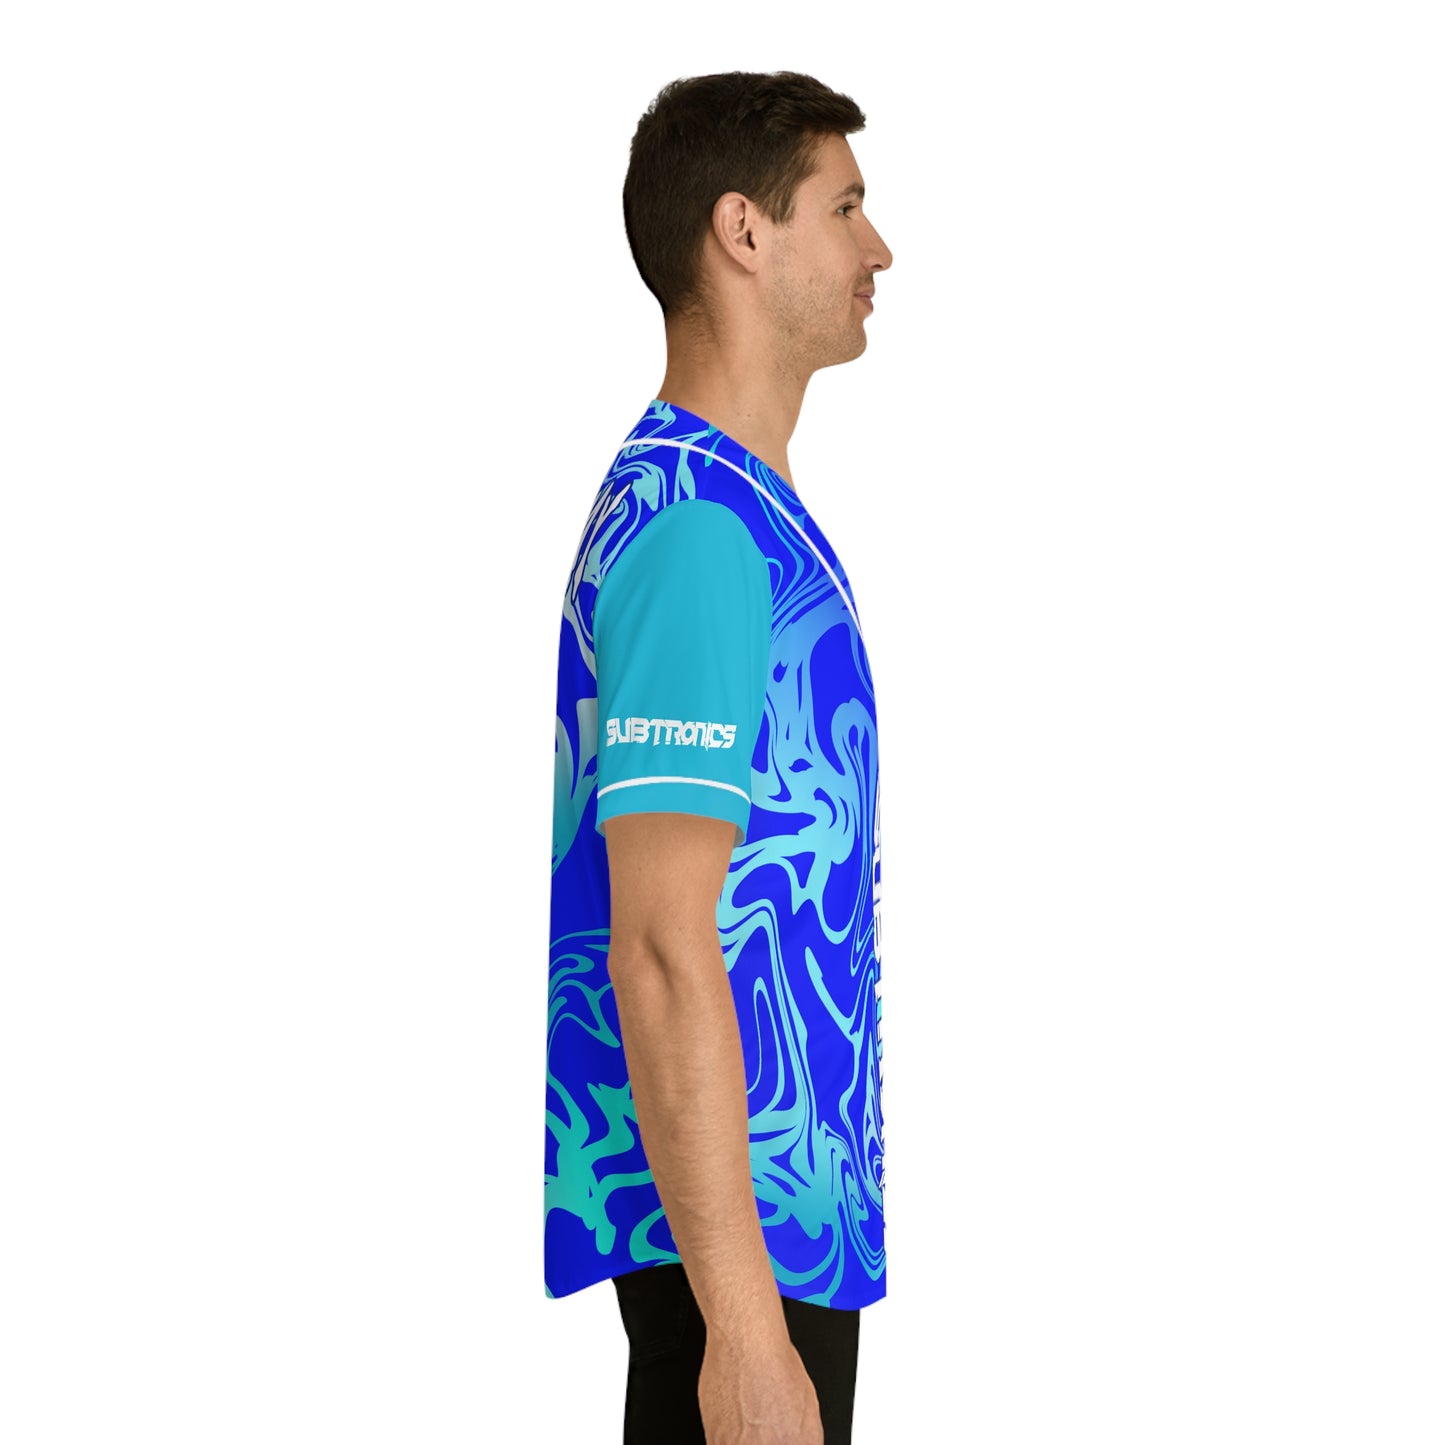 Subtronics Cyclops Army Jersey (Blue, Front Name)